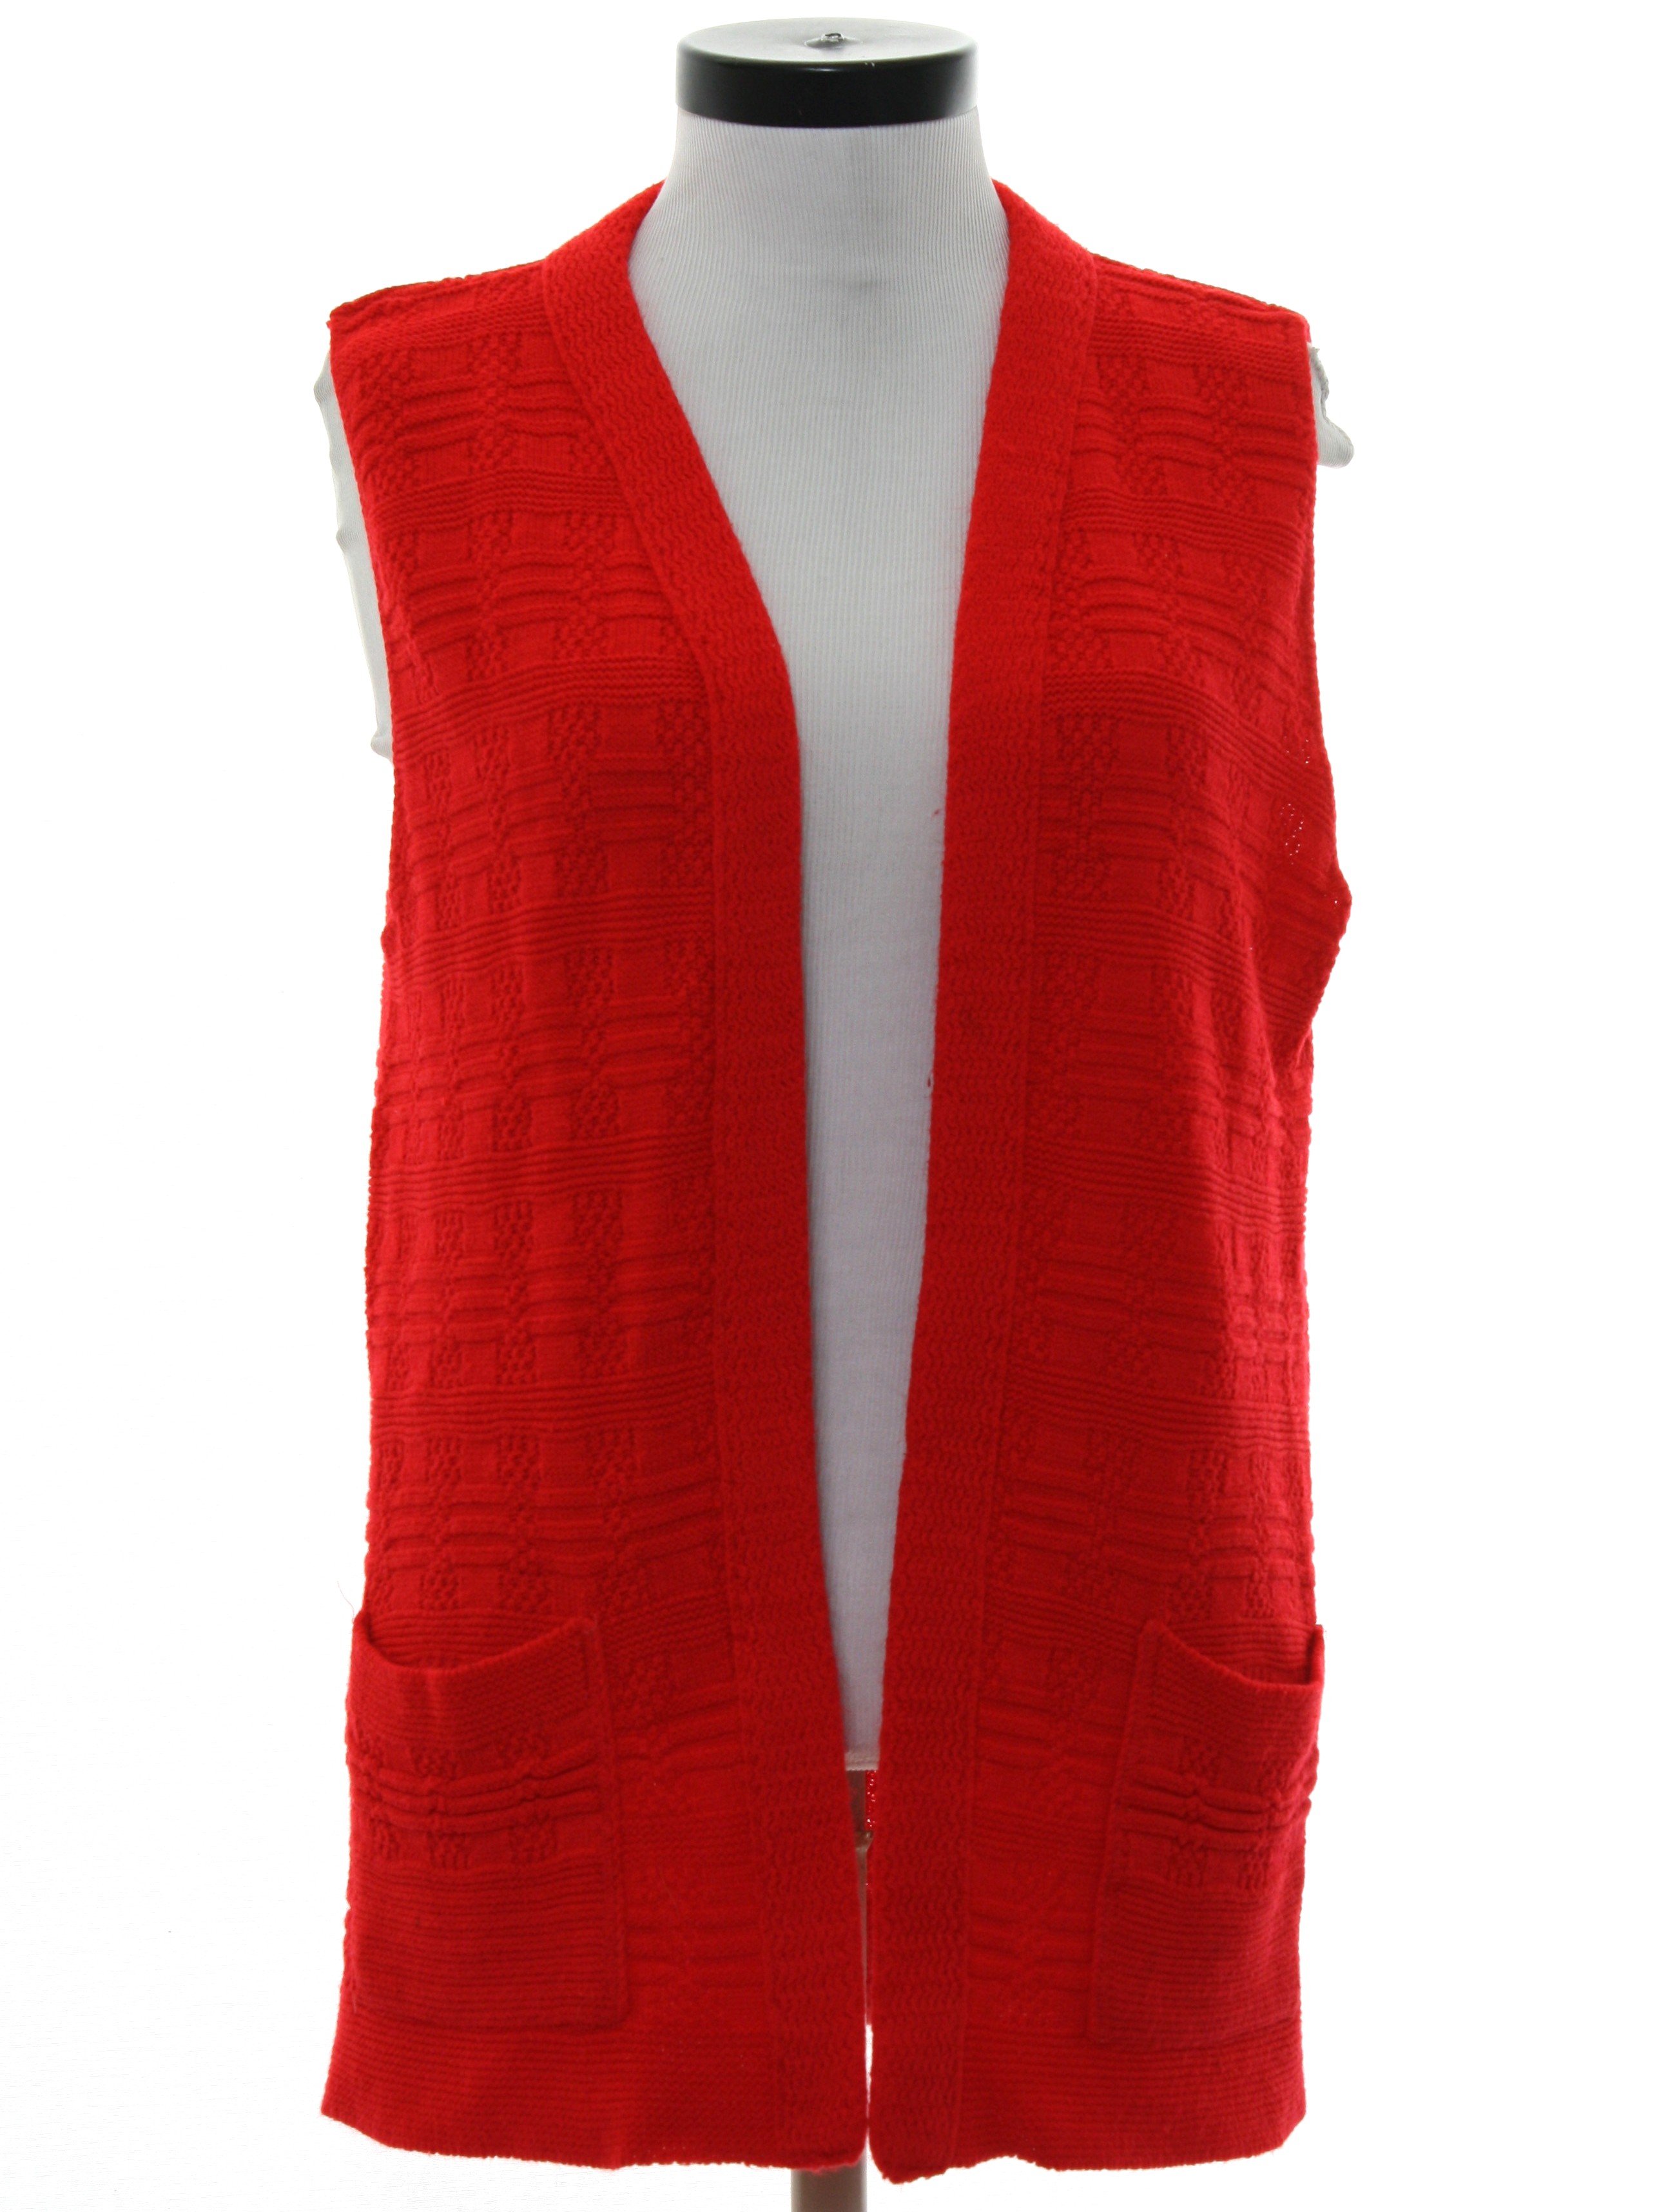 Red sweater vest for ladies pants